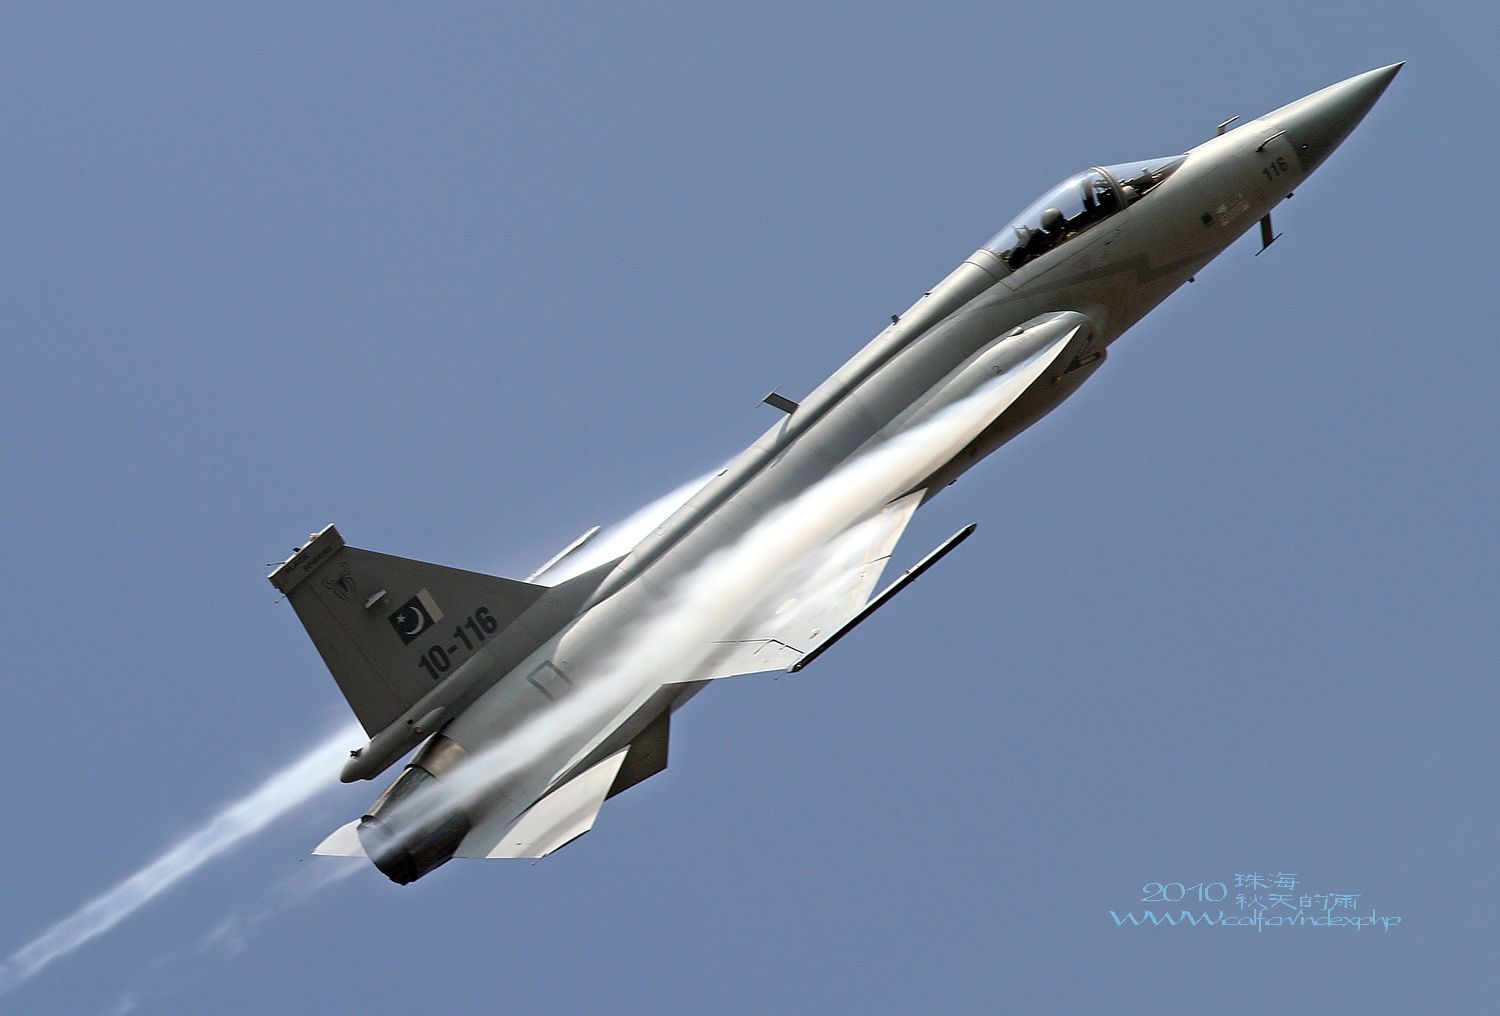 JF 17 THUNDER WALLPAPERS. Fighter Jets, Thunder, Aircraft